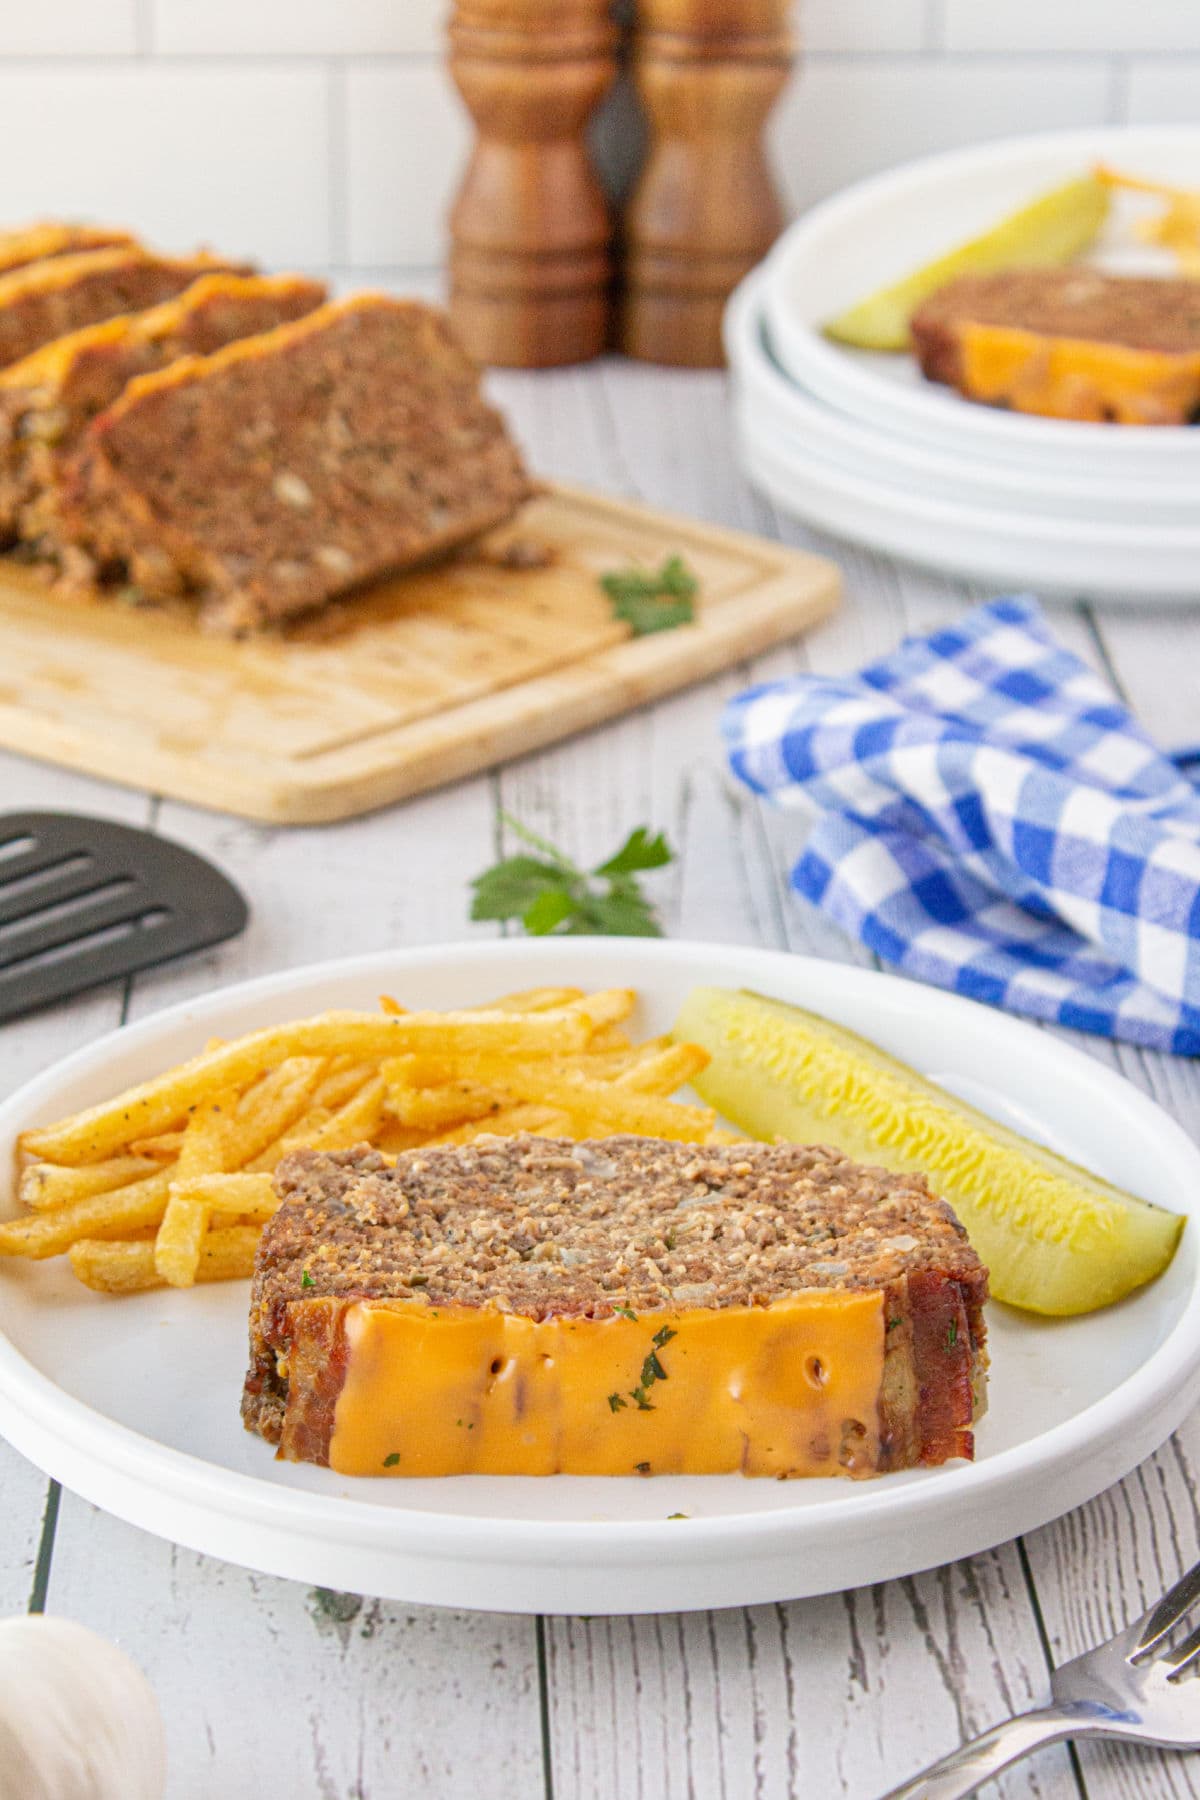 Slice of meatloaf on a plate with fries.